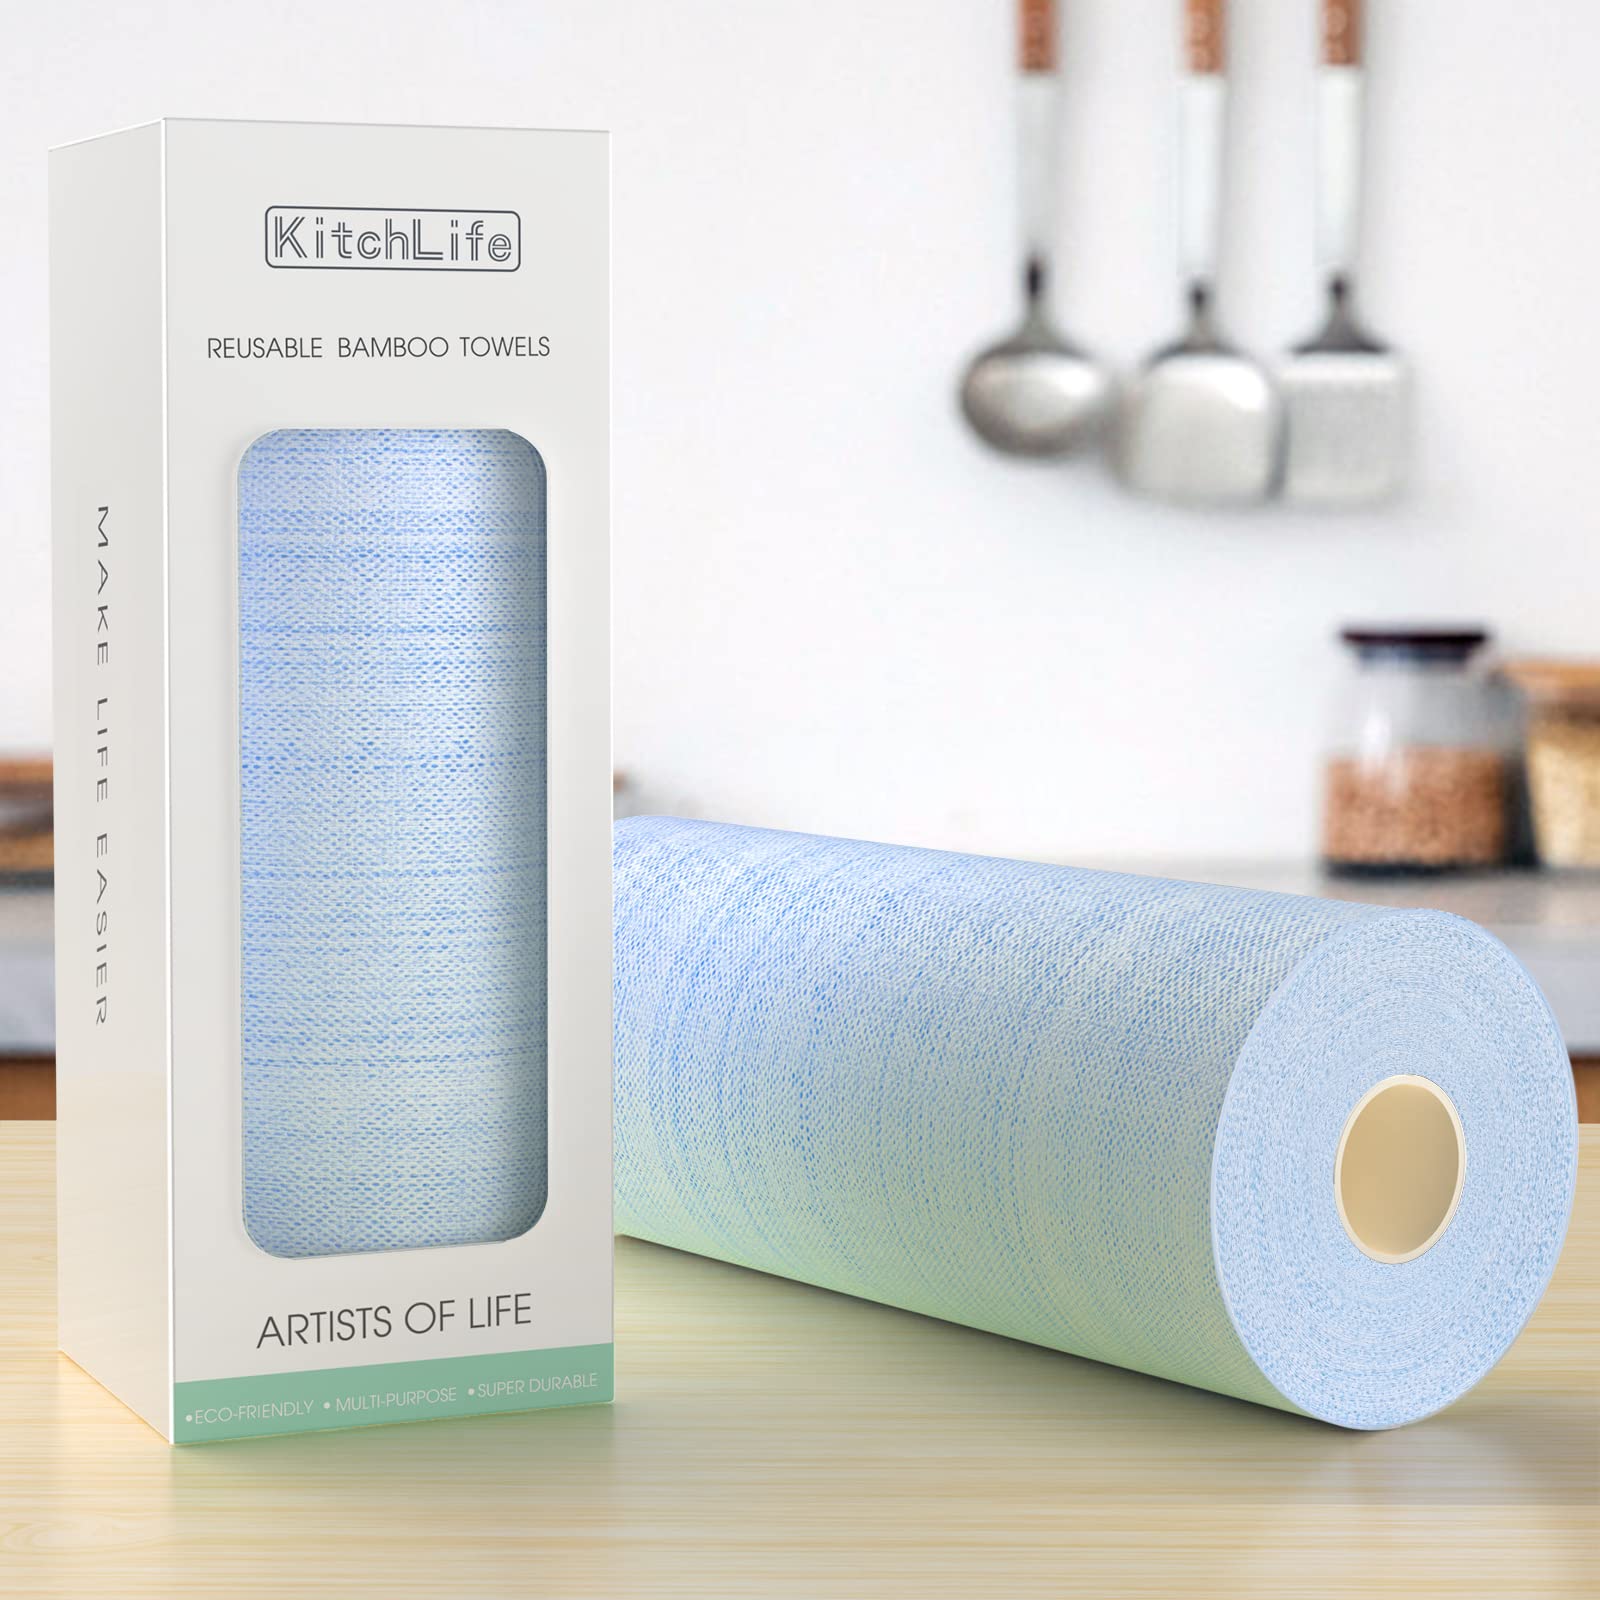 KitchLife Reusable Bamboo Paper Towels - 1 Roll 4 Months Supply